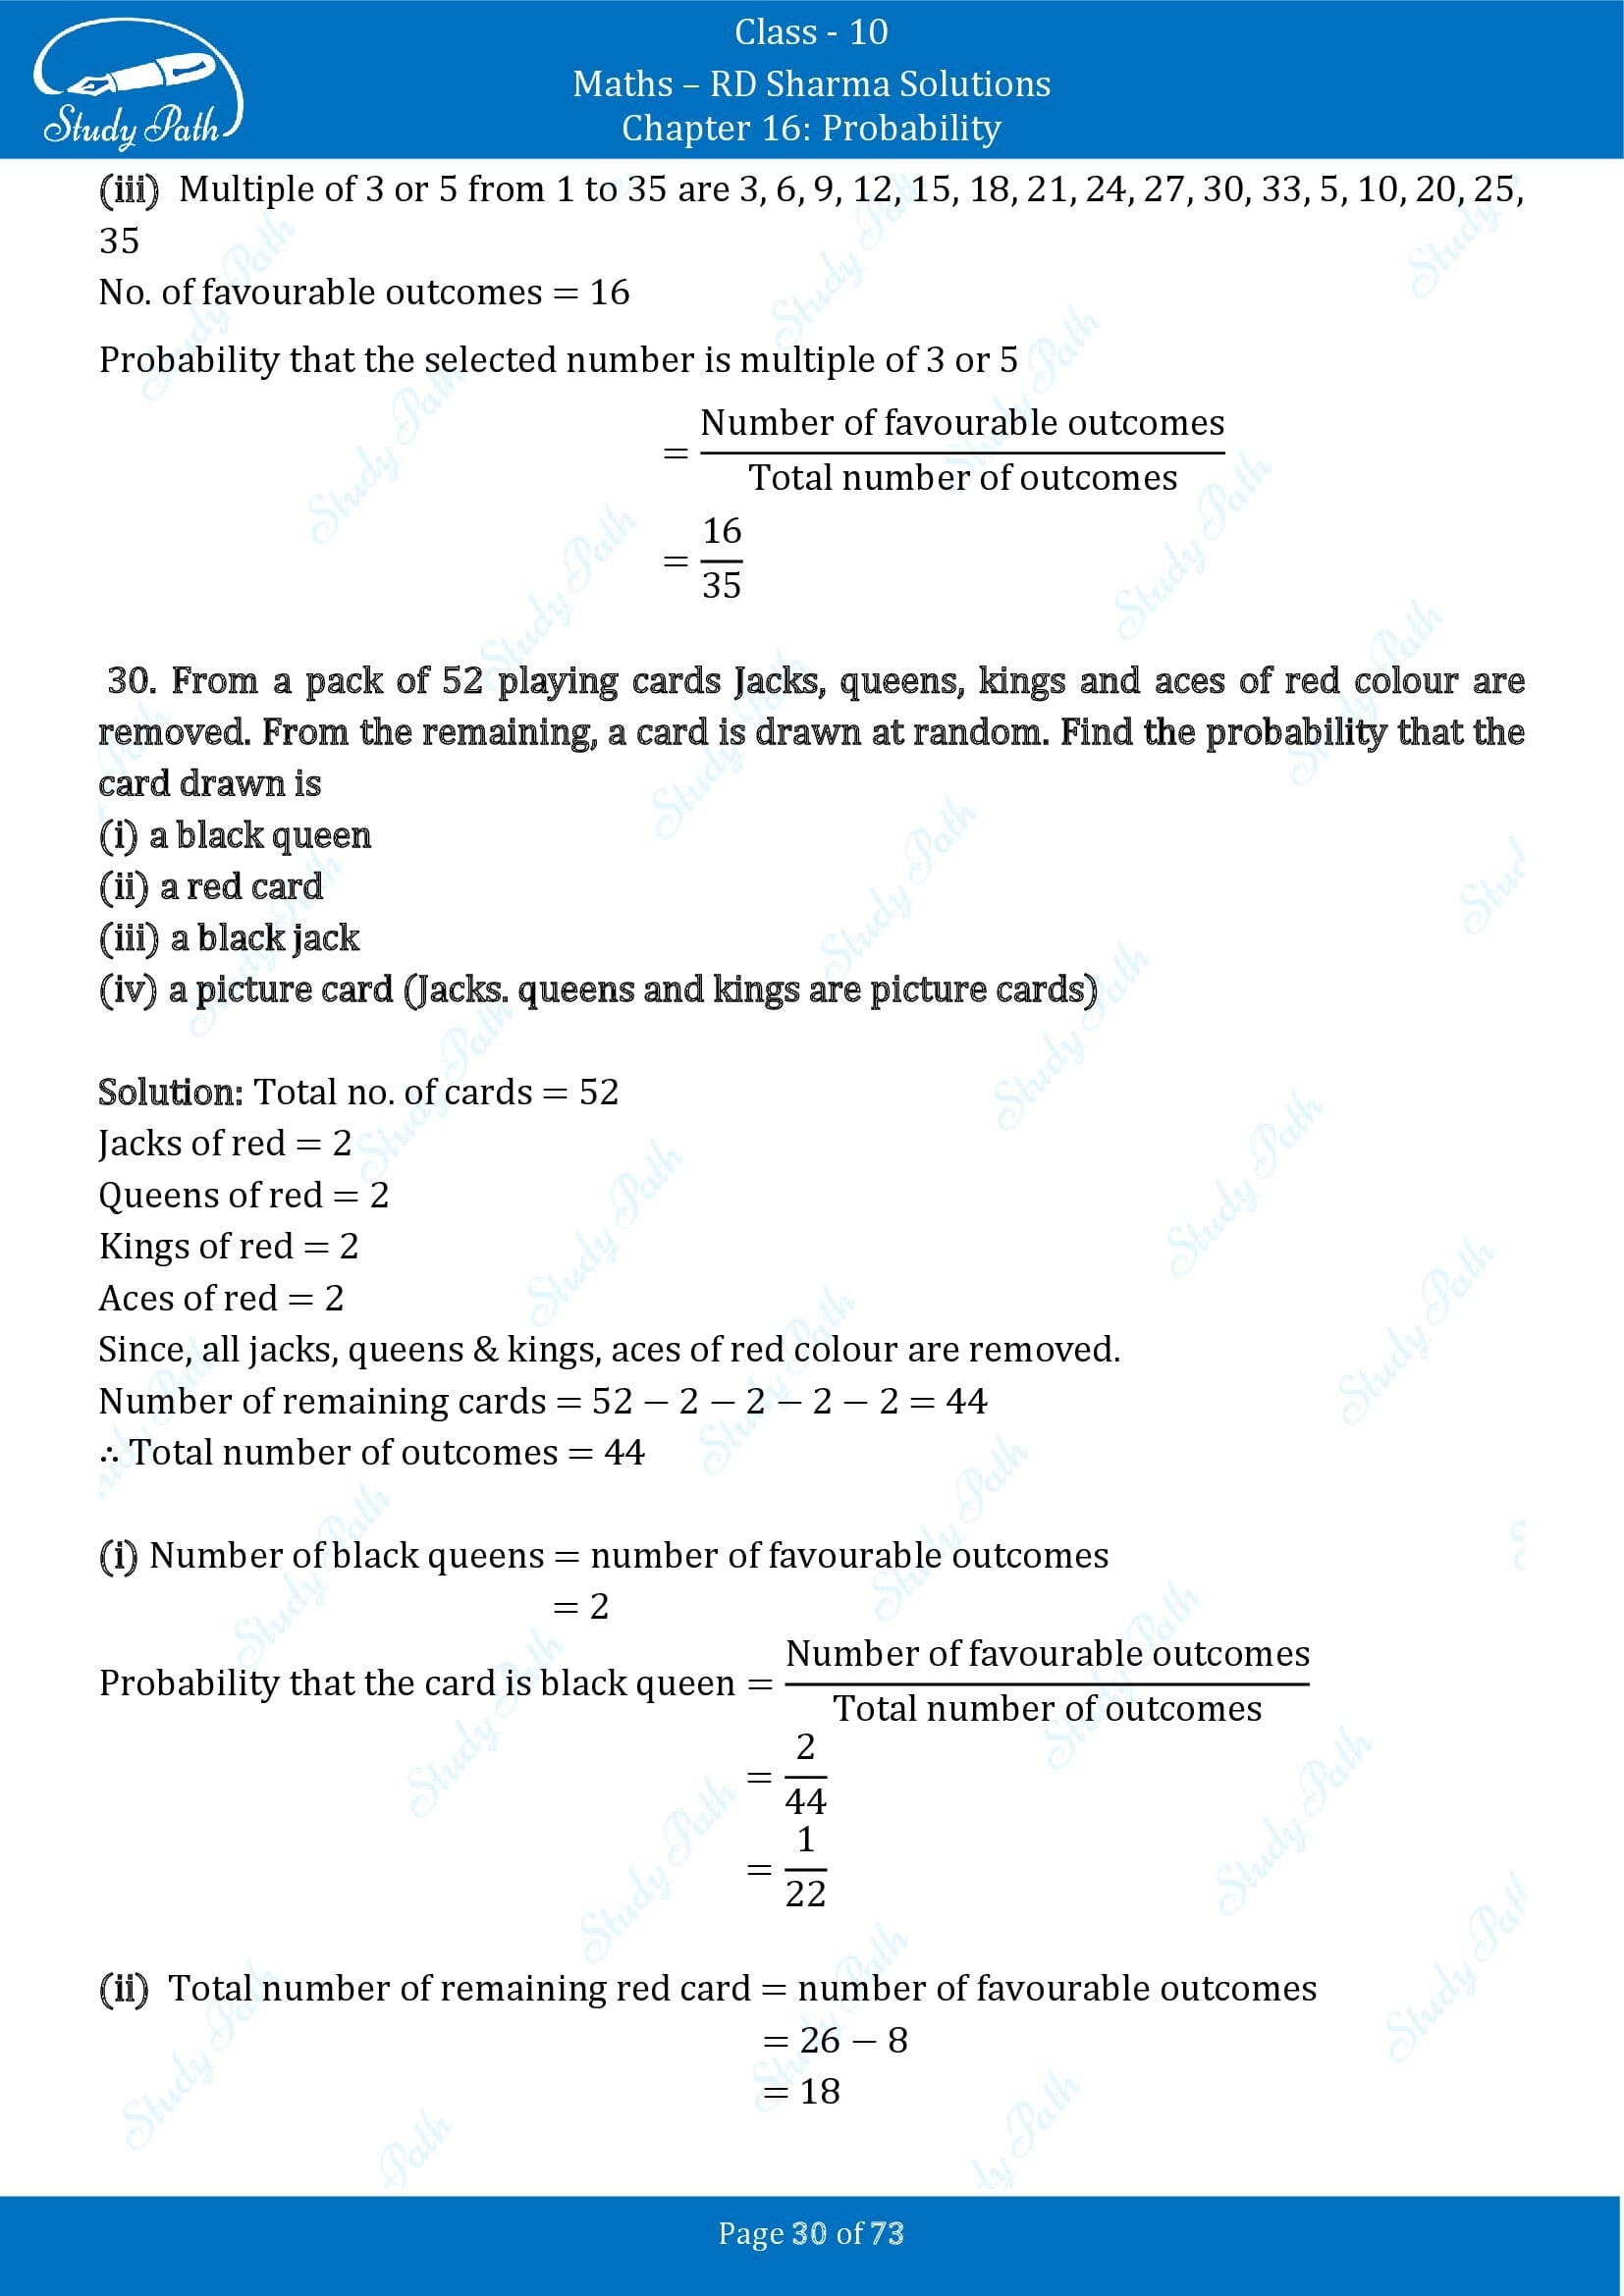 RD Sharma Solutions Class 10 Chapter 16 Probability Exercise 16.1 00030